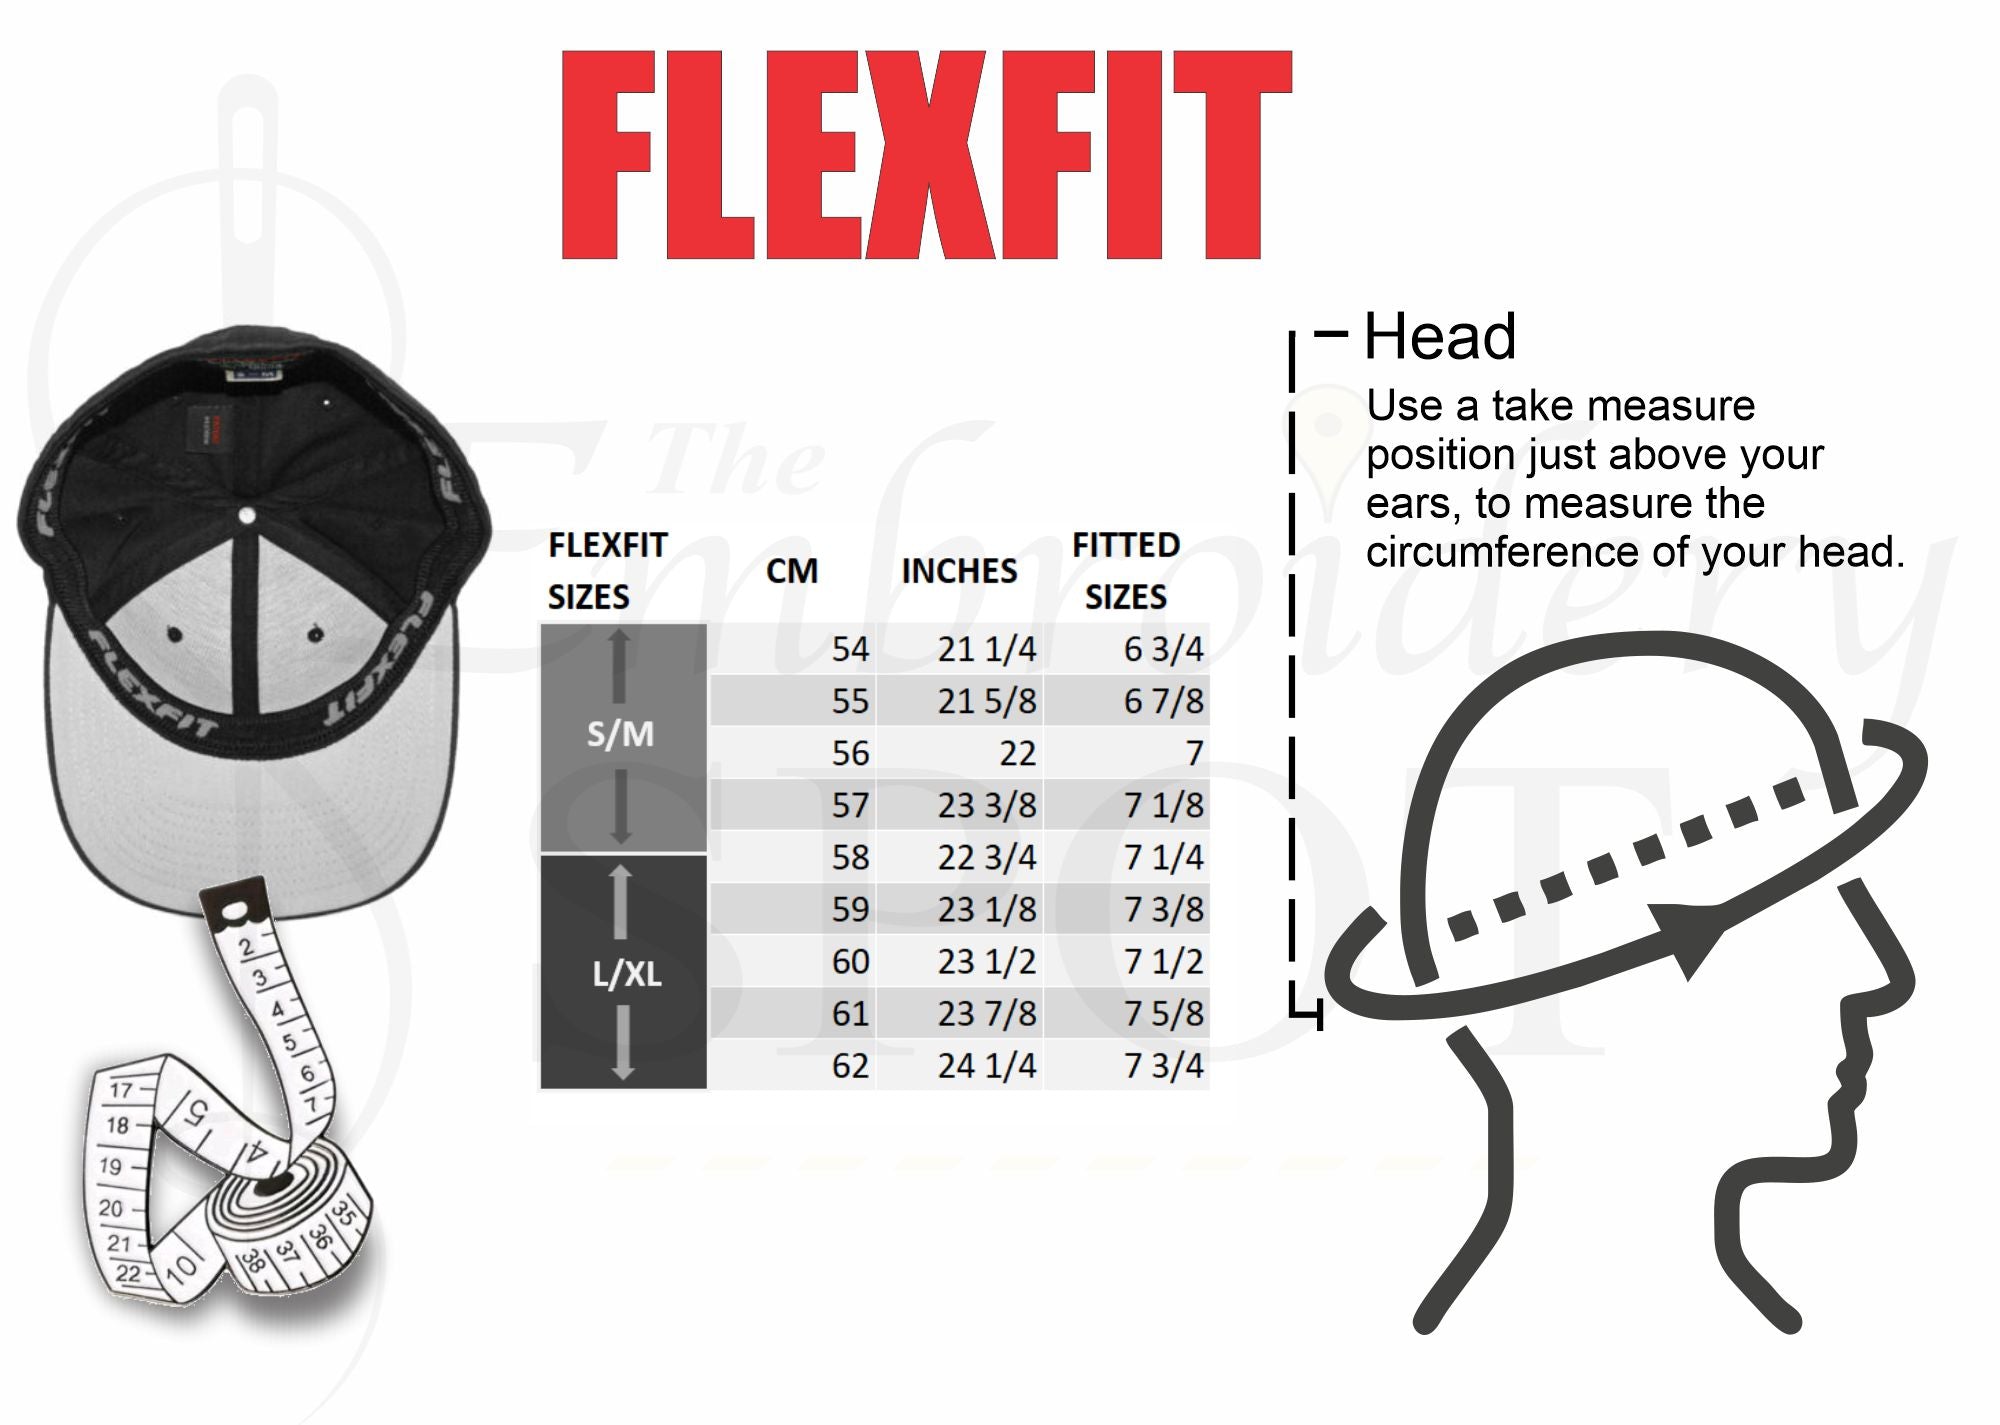 Fitted FlexFit